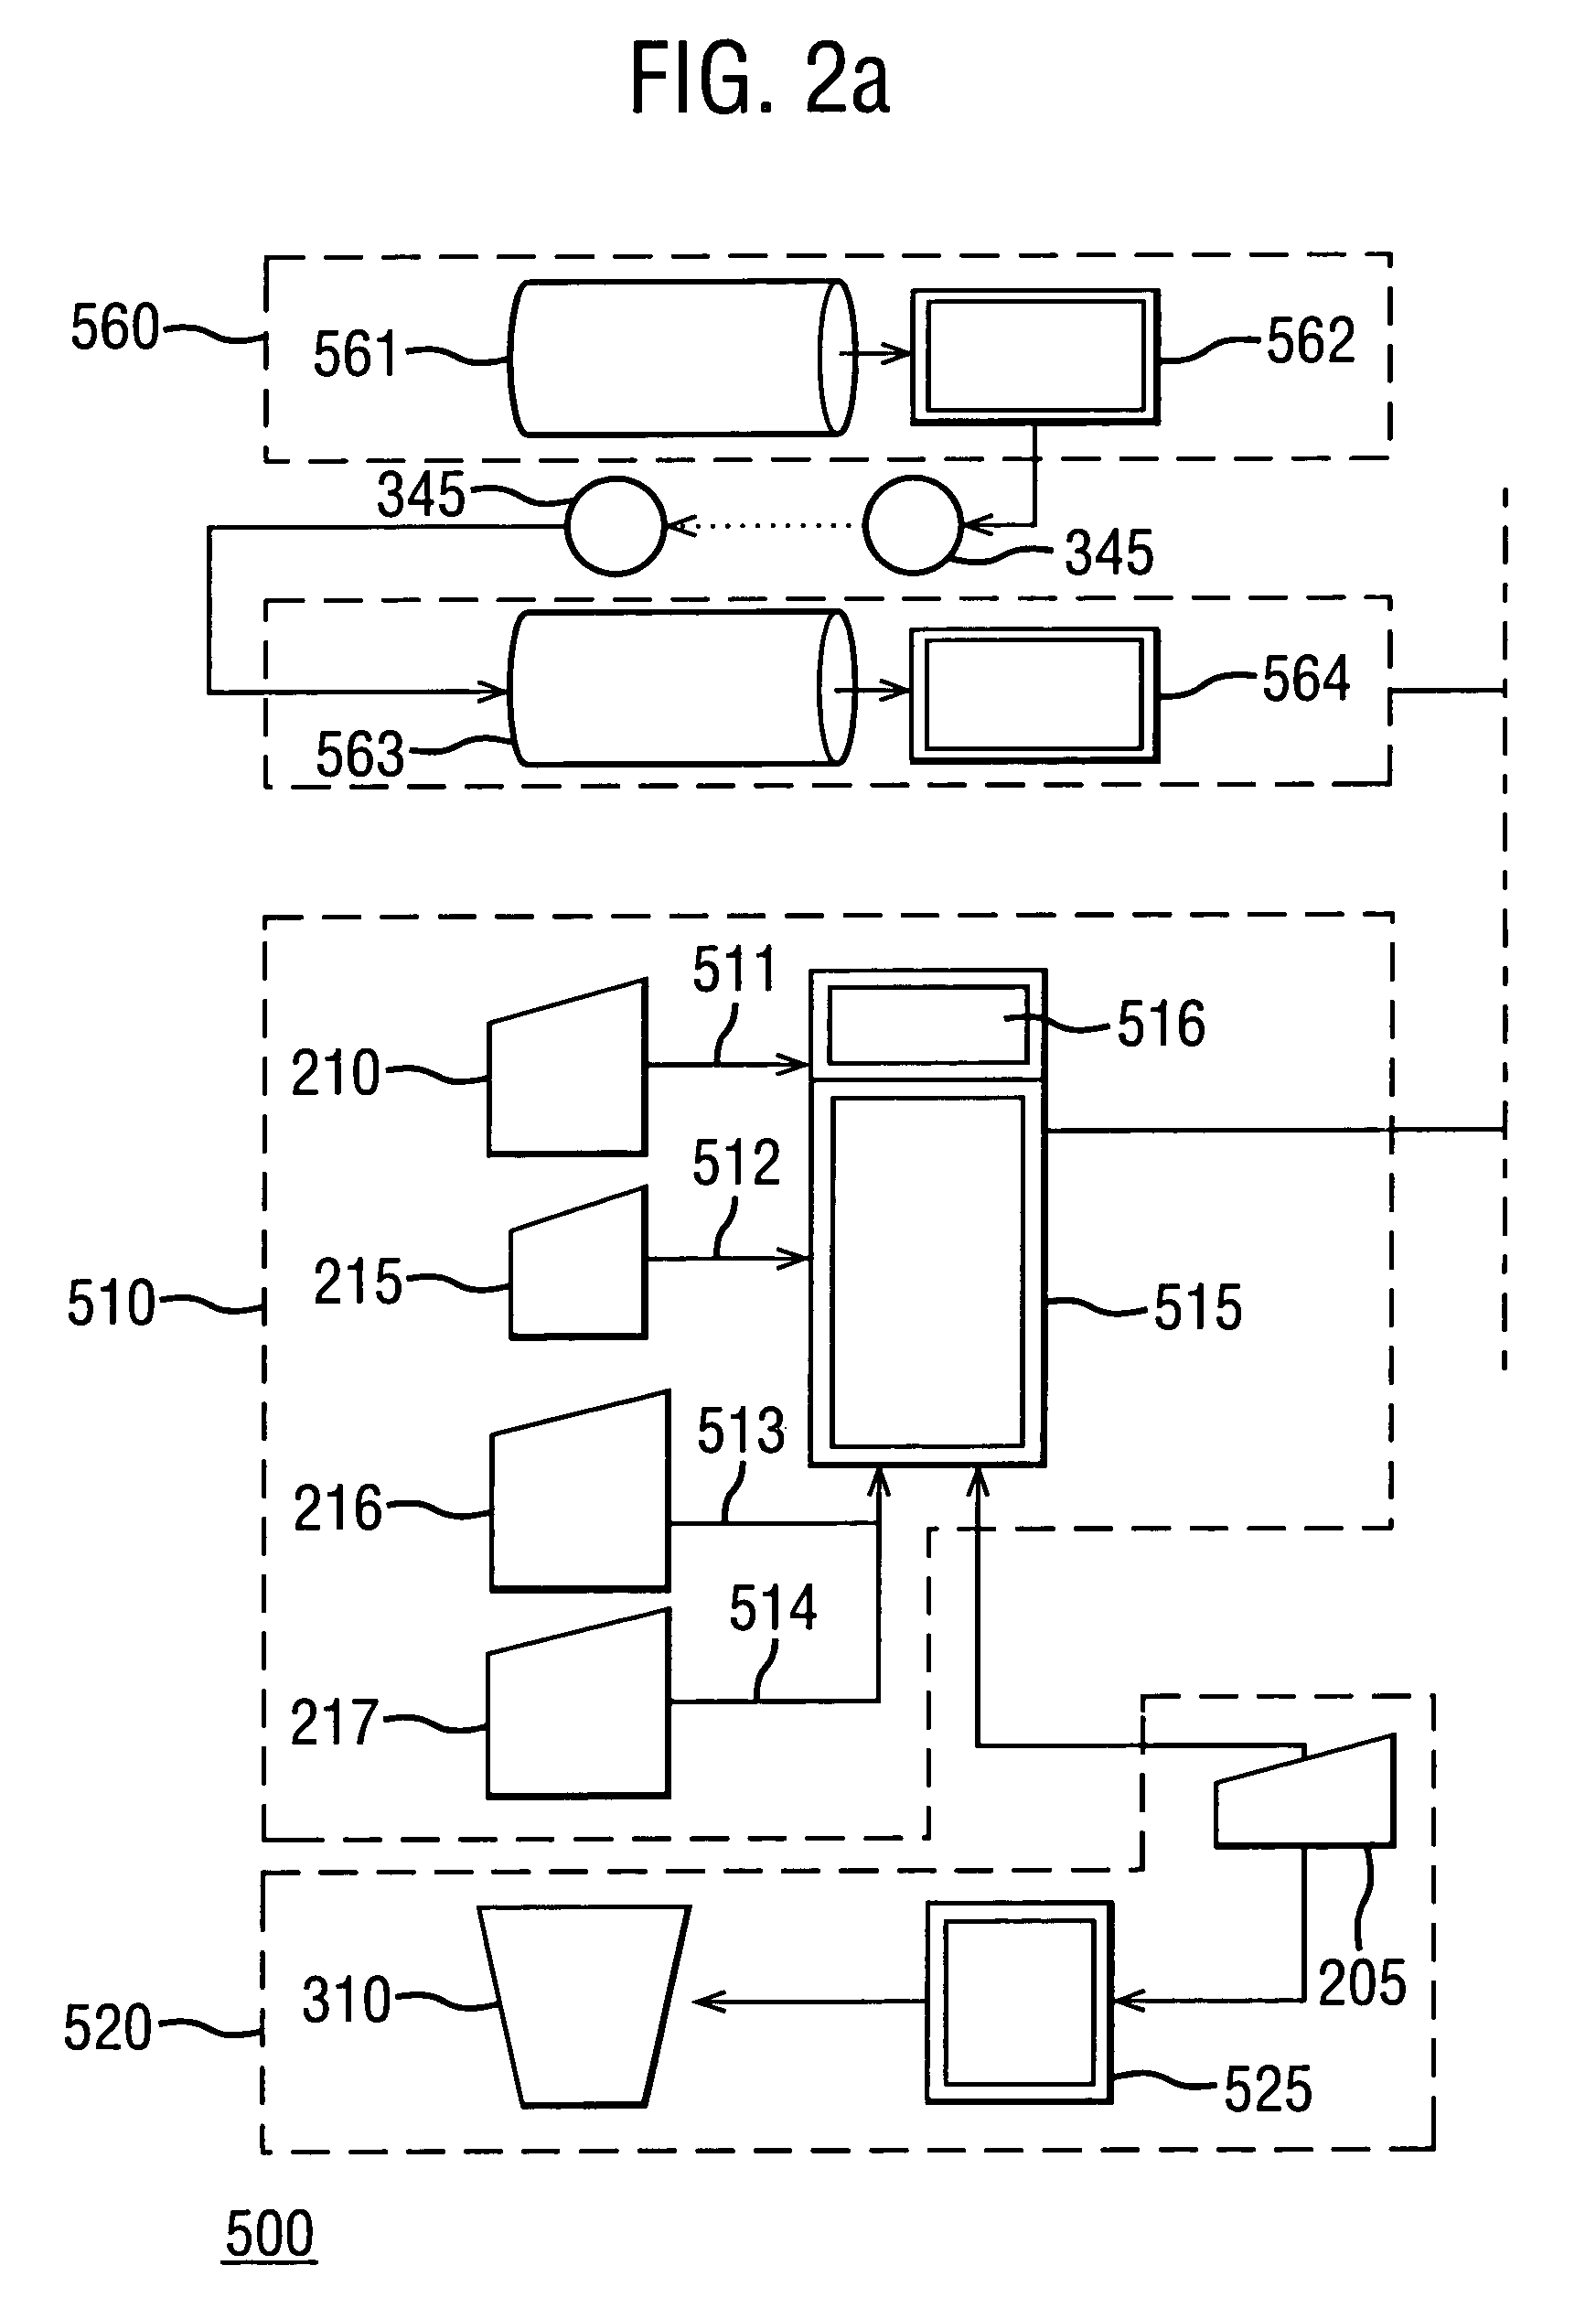 Method and system for analyzing coatings undergoing exposure testing